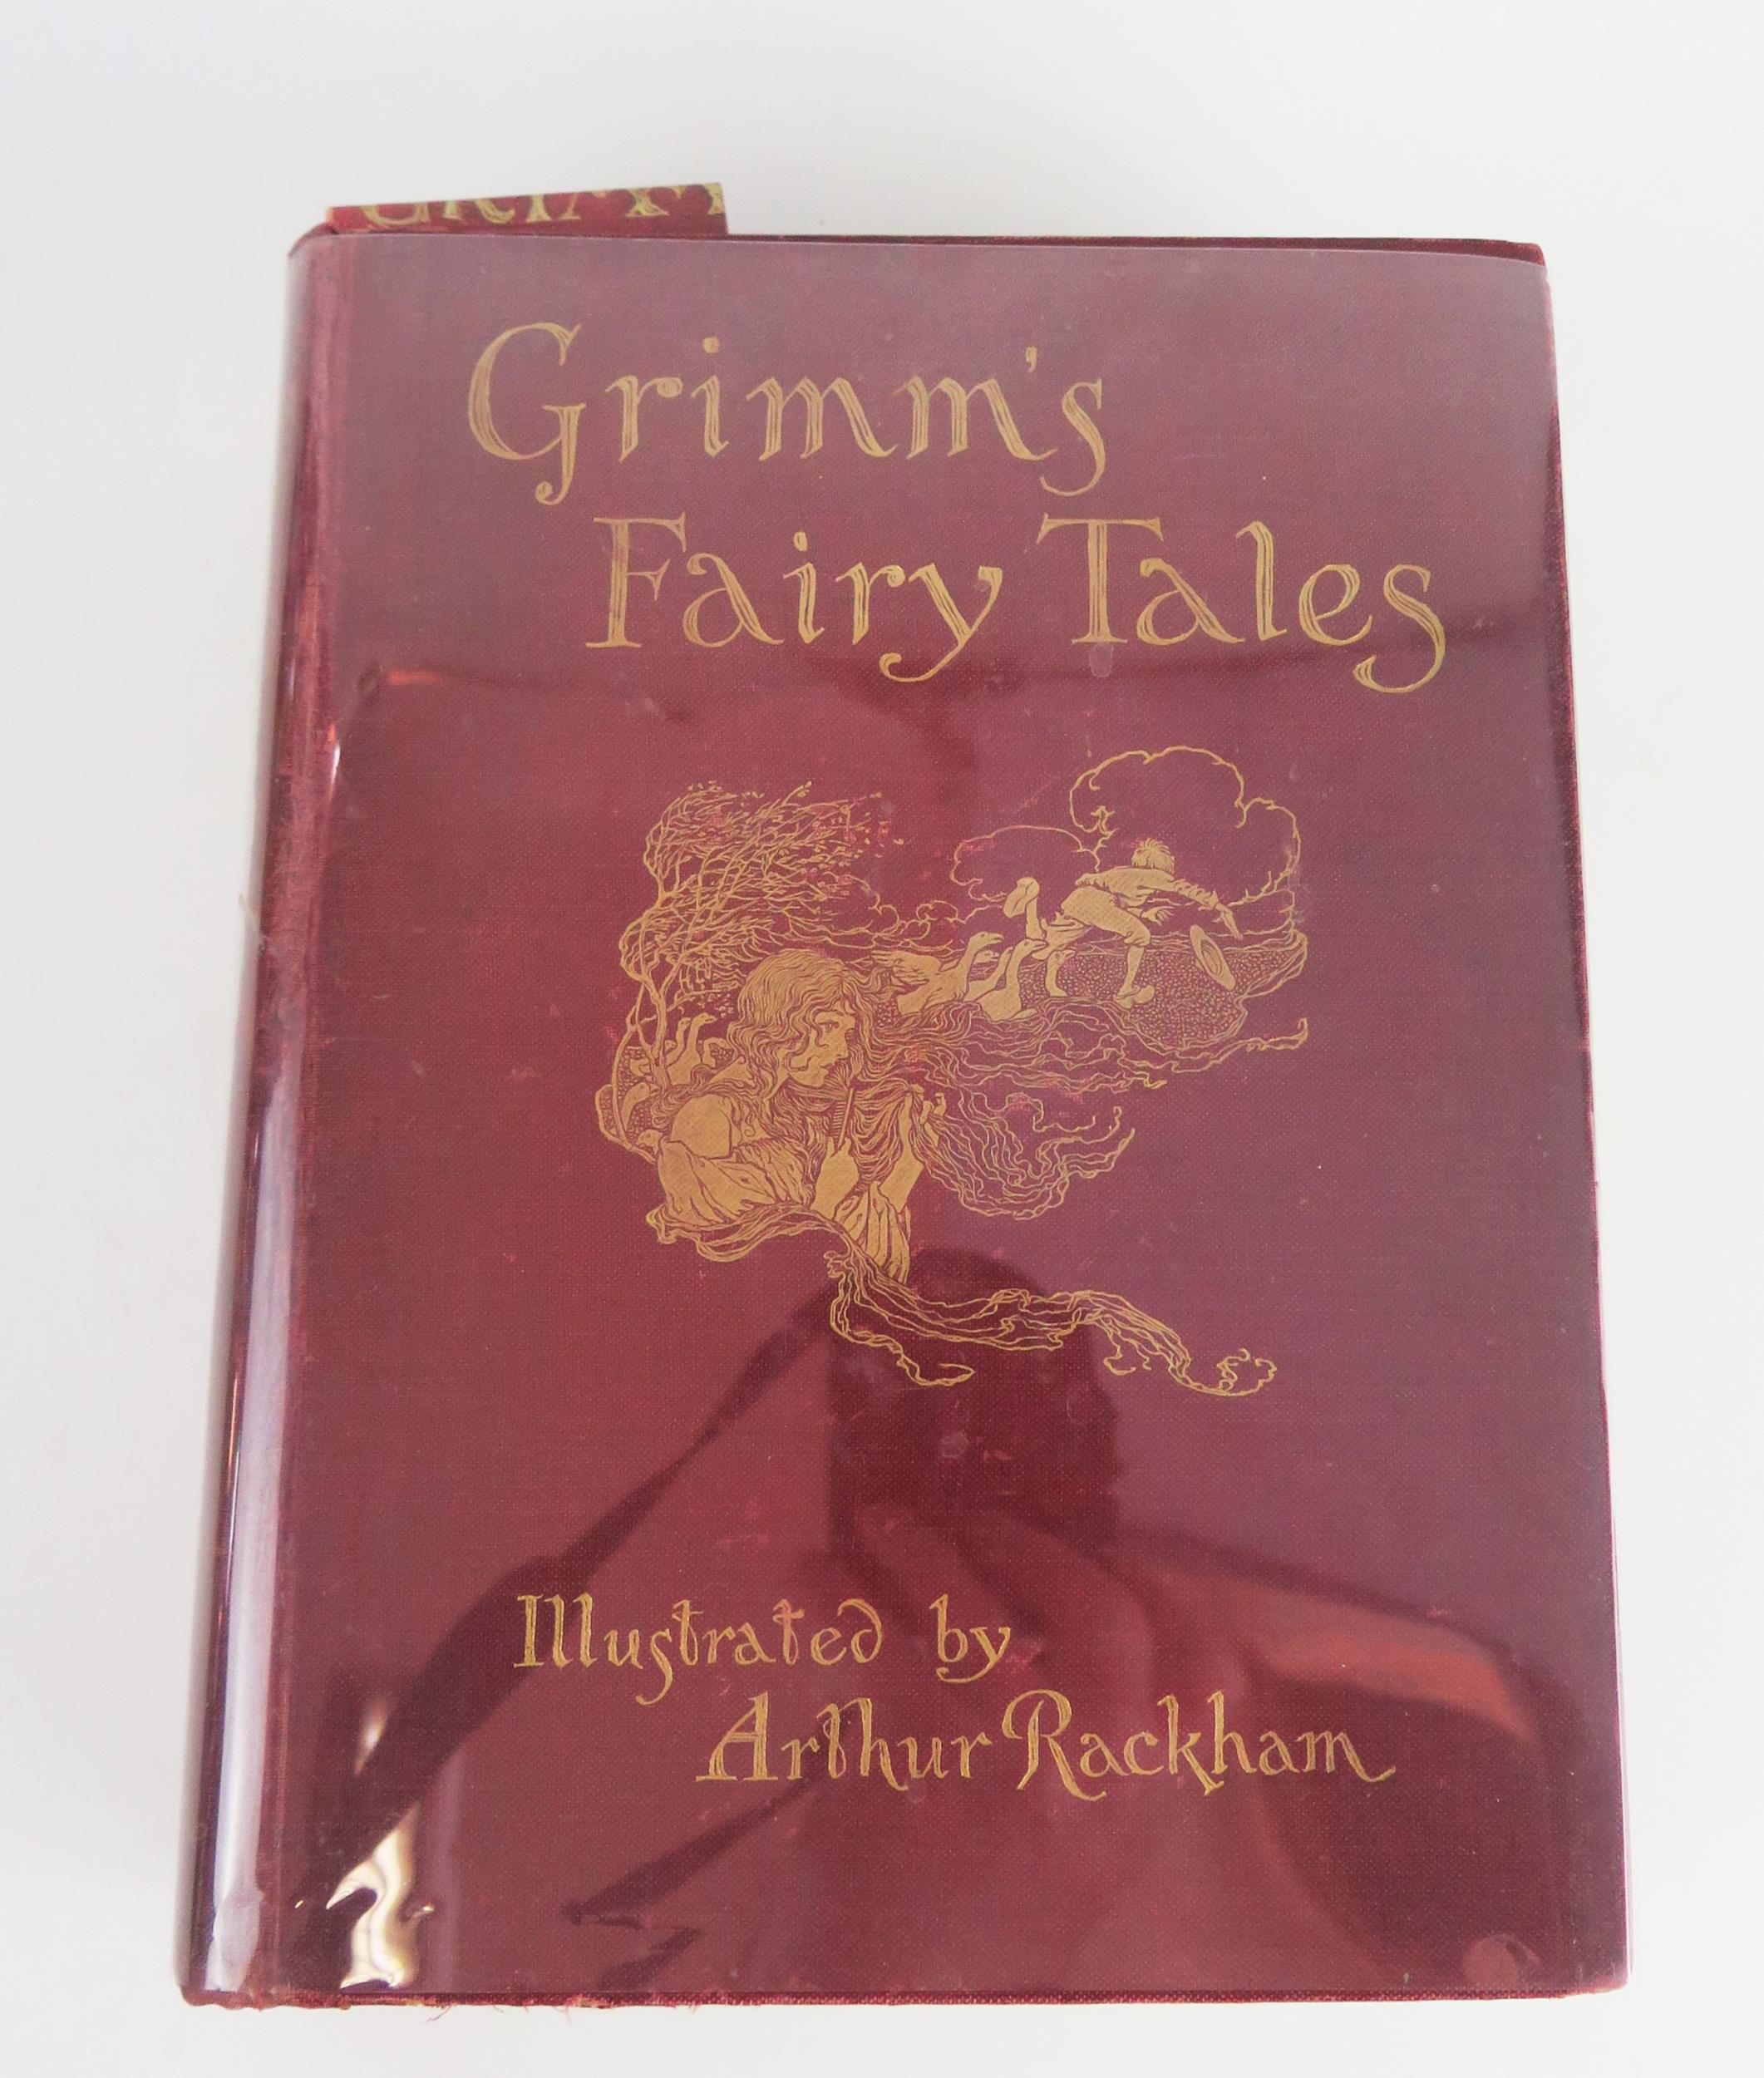 Grimm's Fairy Tales Illustrated by Arthur Rackham, published by Constable & Co. 1909, red cloth